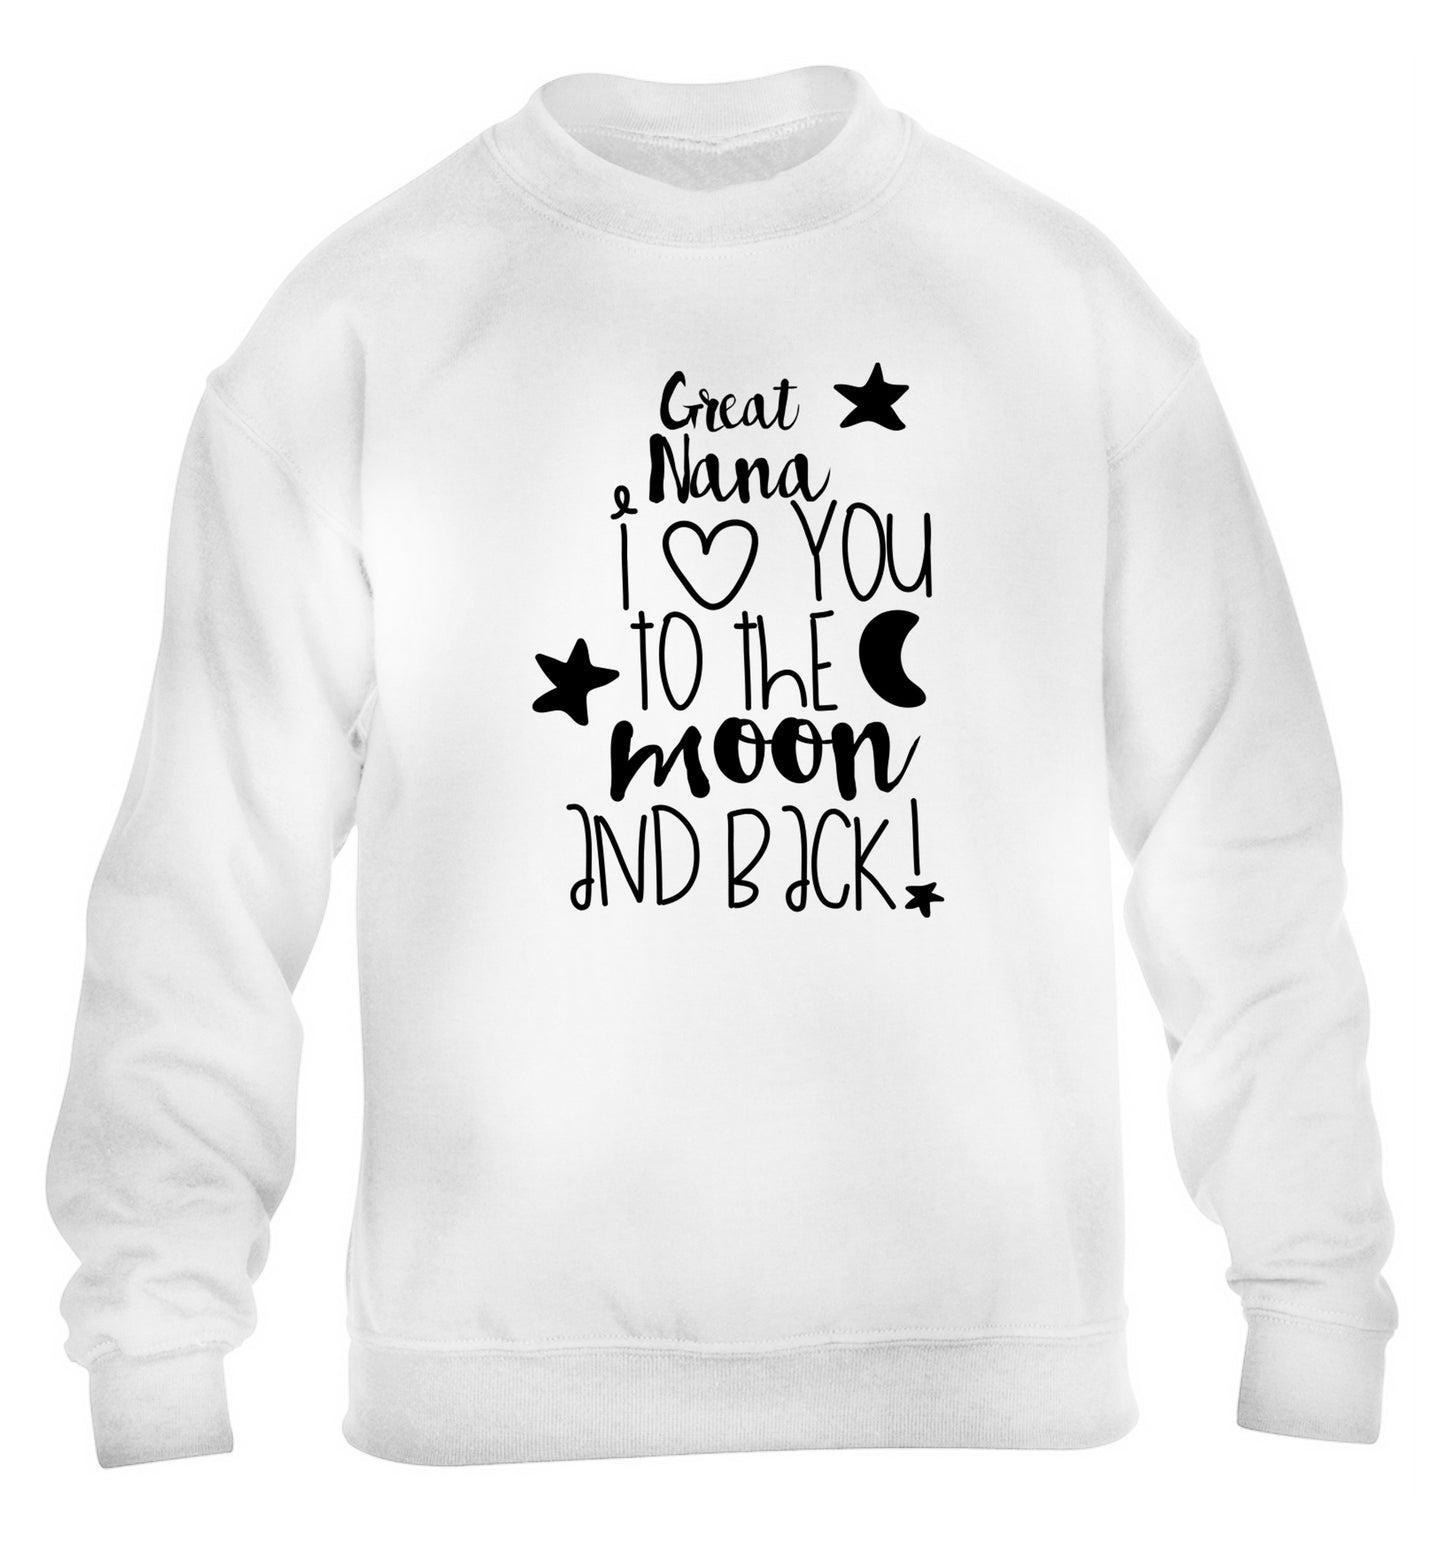 Great Nana I love you to the moon and back children's white  sweater 12-14 Years